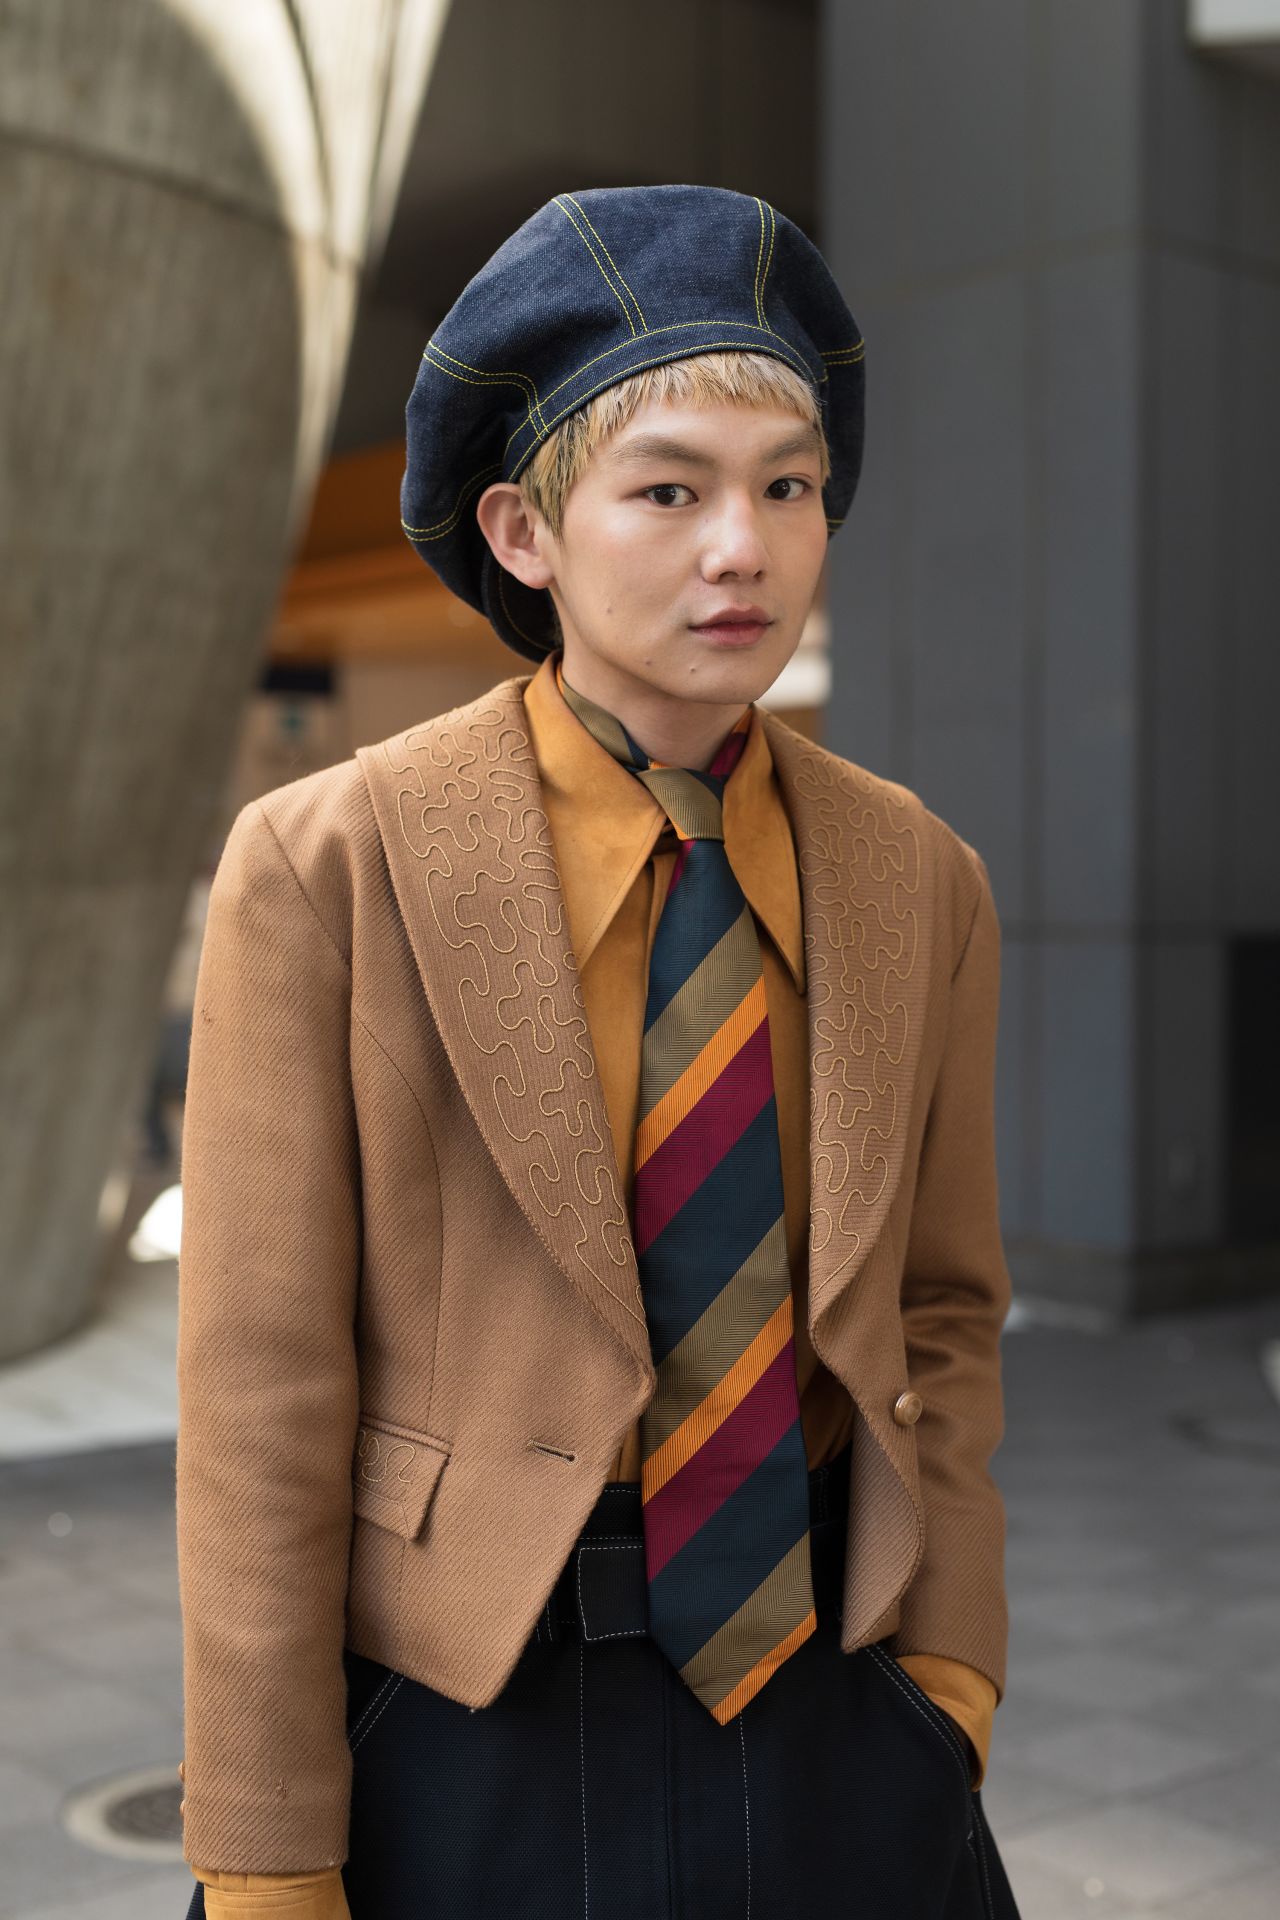 An attendee at Seivson fashion festival is seen wearing a vintage striped tie, a denim beret and an embellished tan blazer.